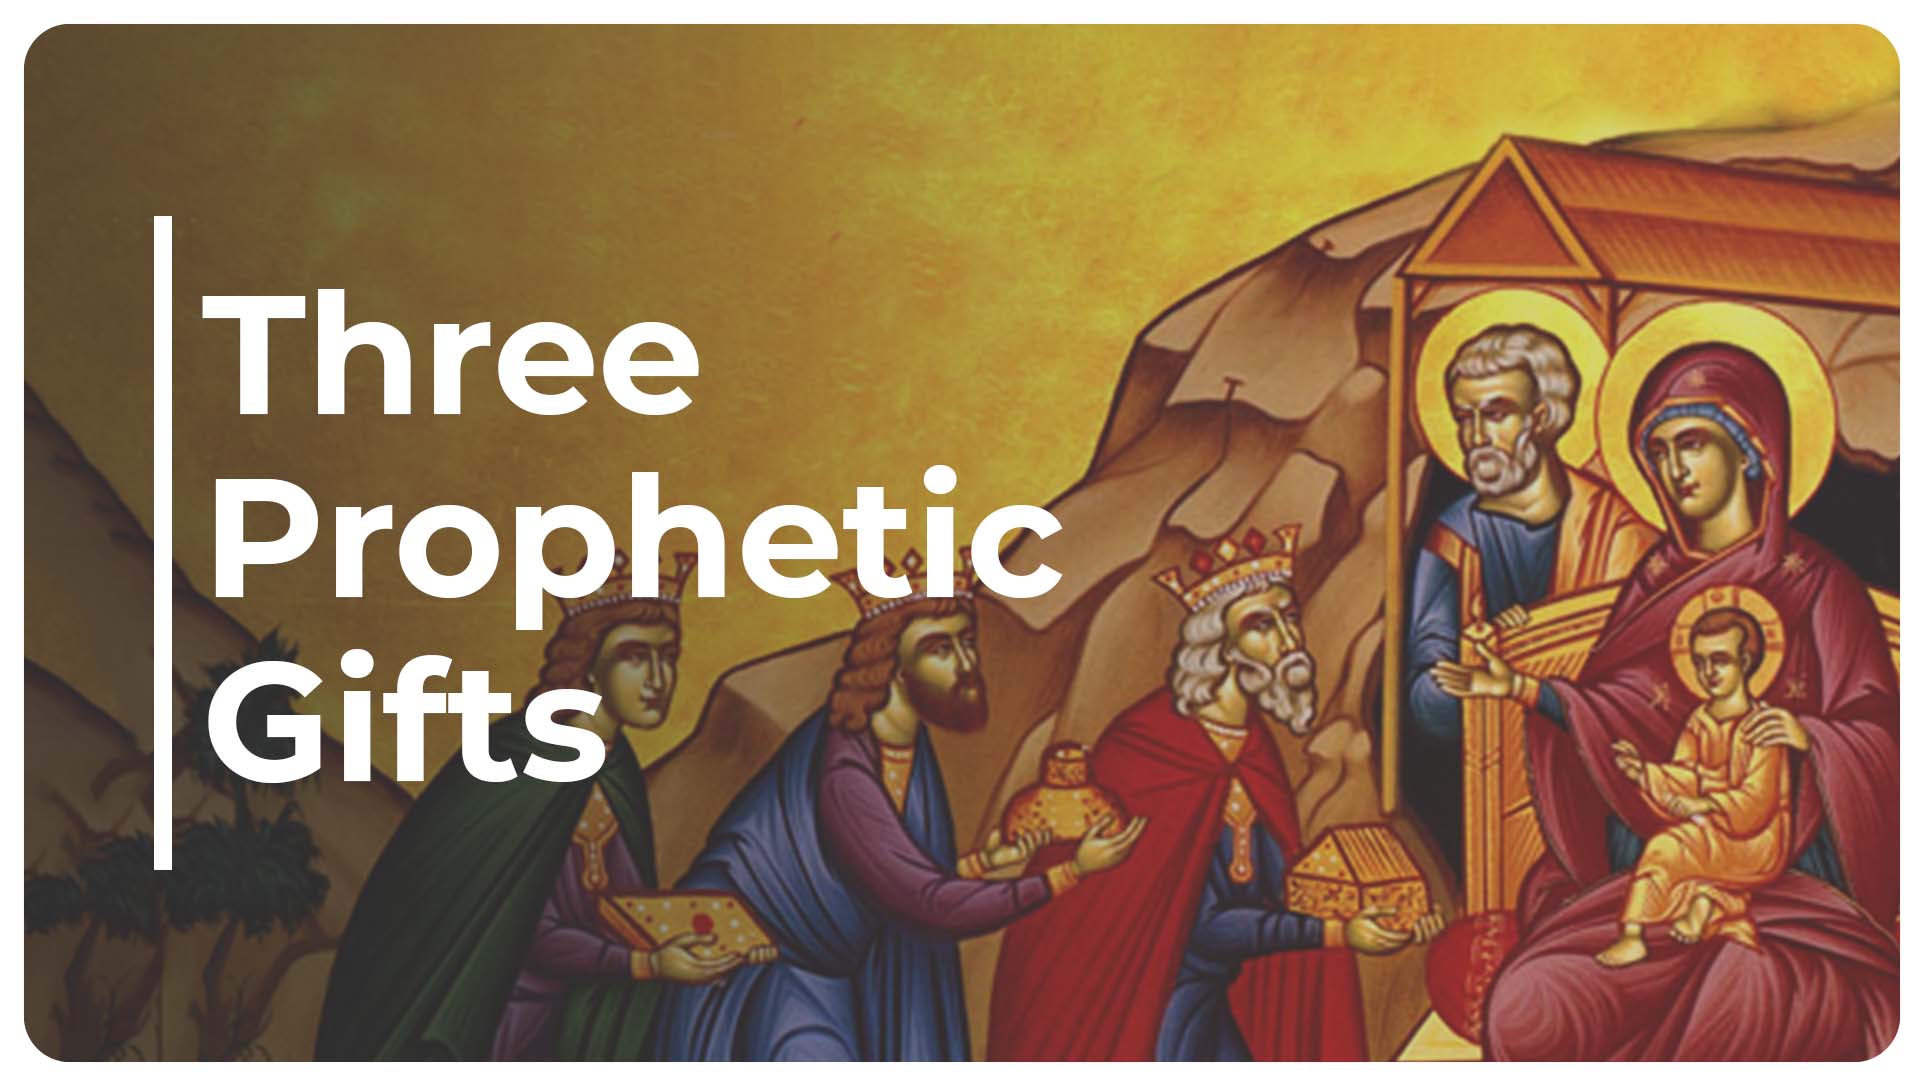 Three Prophetic Gifts